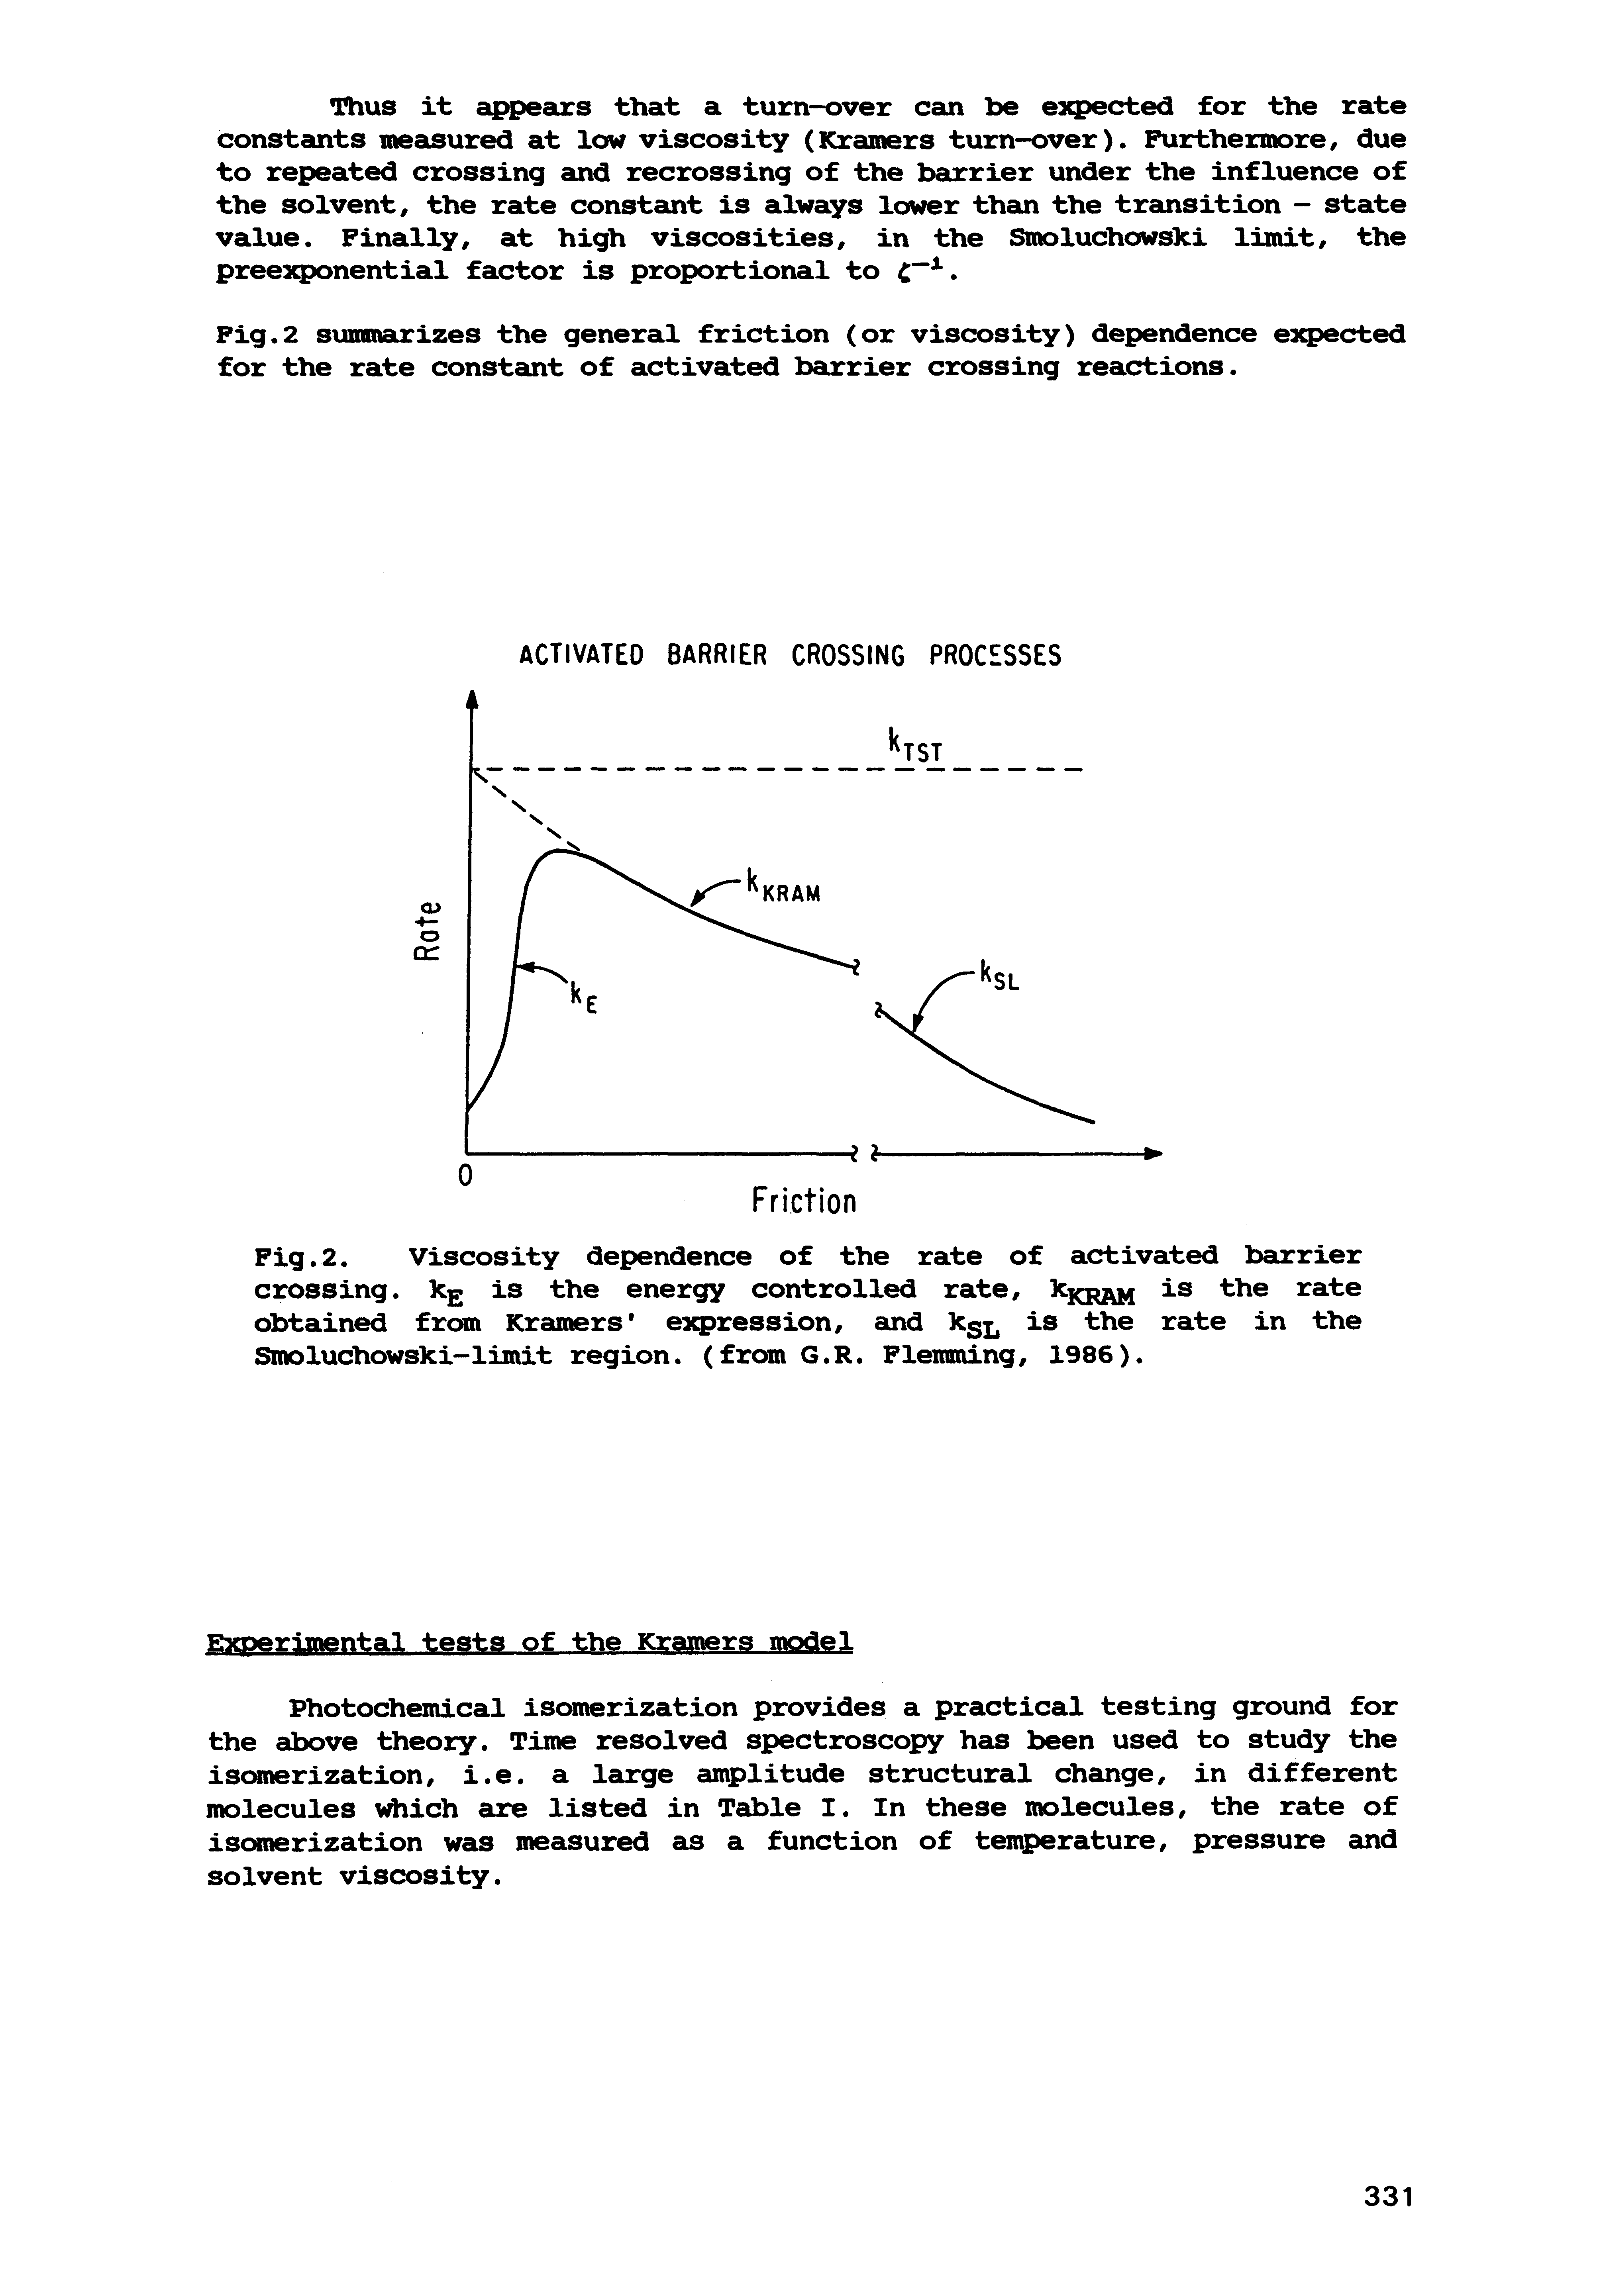 Fig.2. Viscosity dependence of the rate of activated bairrier crossing, k is the energy controlled rate, kjQ is the rate obtained from Kramers expression, and k5jj is the rate in the Smoluchowski-limit region, (from G.R. Flemming, 1986).